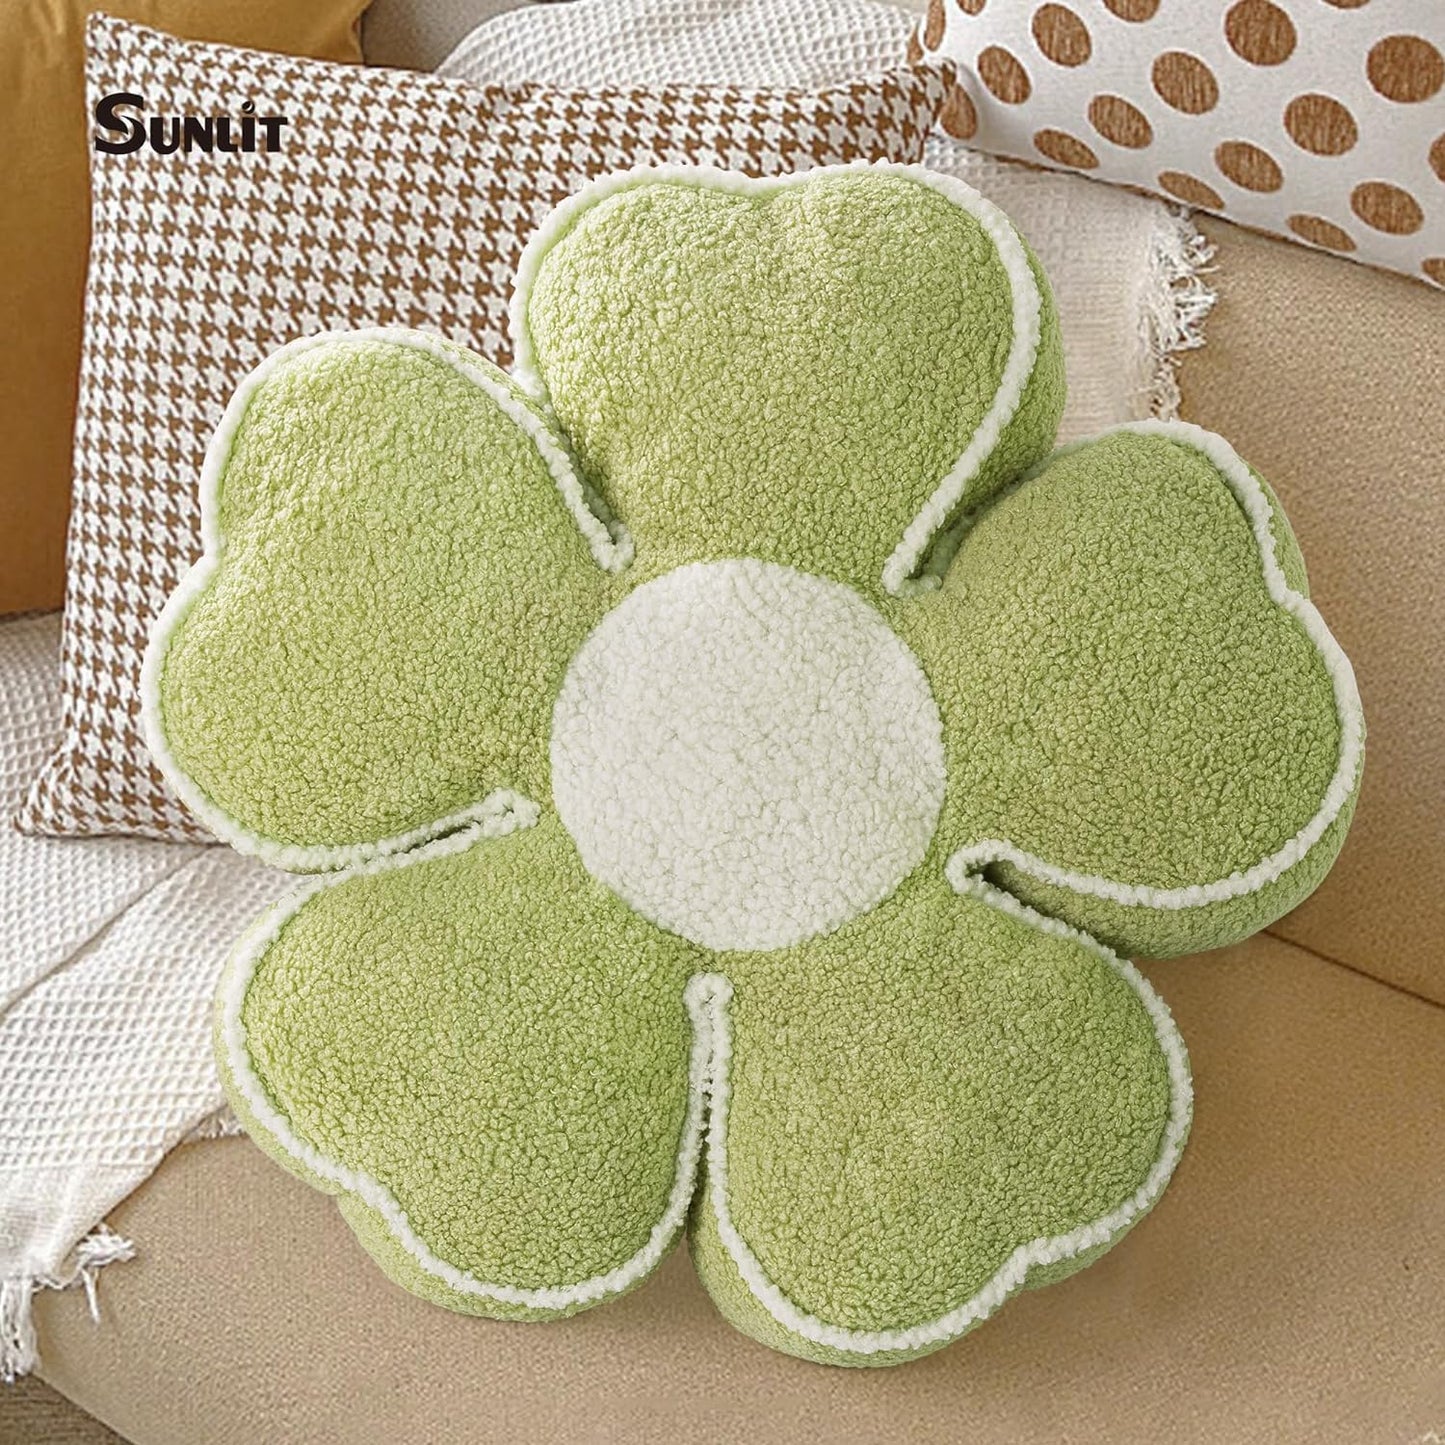 Sunlit 19.7" Flower Pillow, Floral Meditation Floor Pillow Seating Cushion, Plush Throw Pillow for Sitting on Floor Reading Lounging, Boucle Cushion for Bedroom Sofa Chair, Rose Green & White